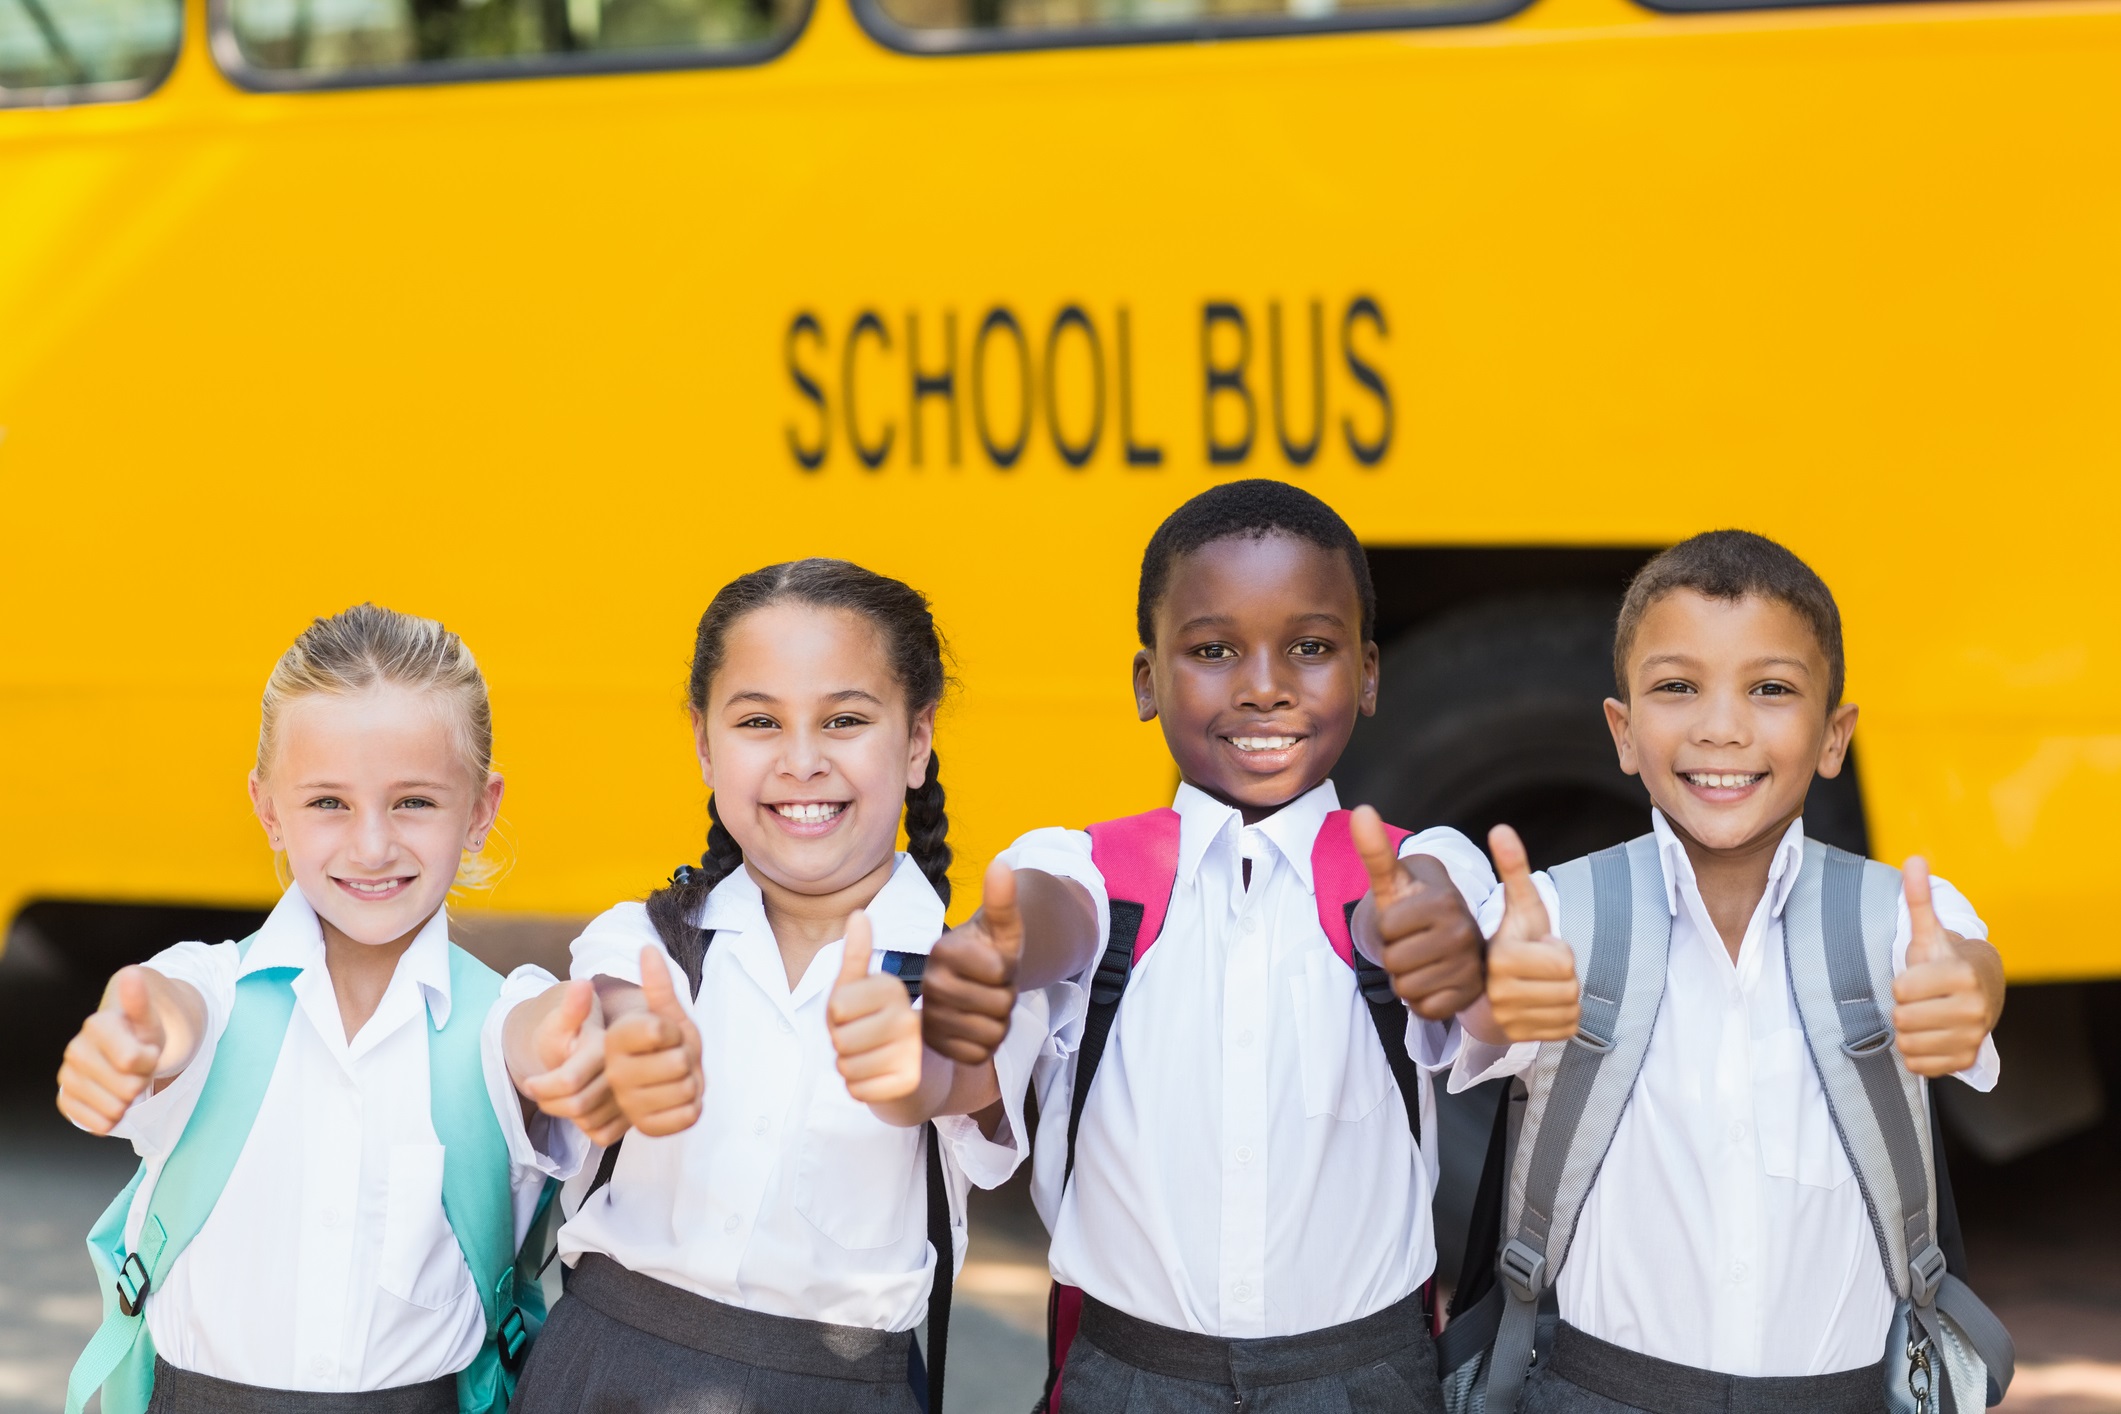 Kids with thubs up in front of bus-Wavebreakmedia Ltd